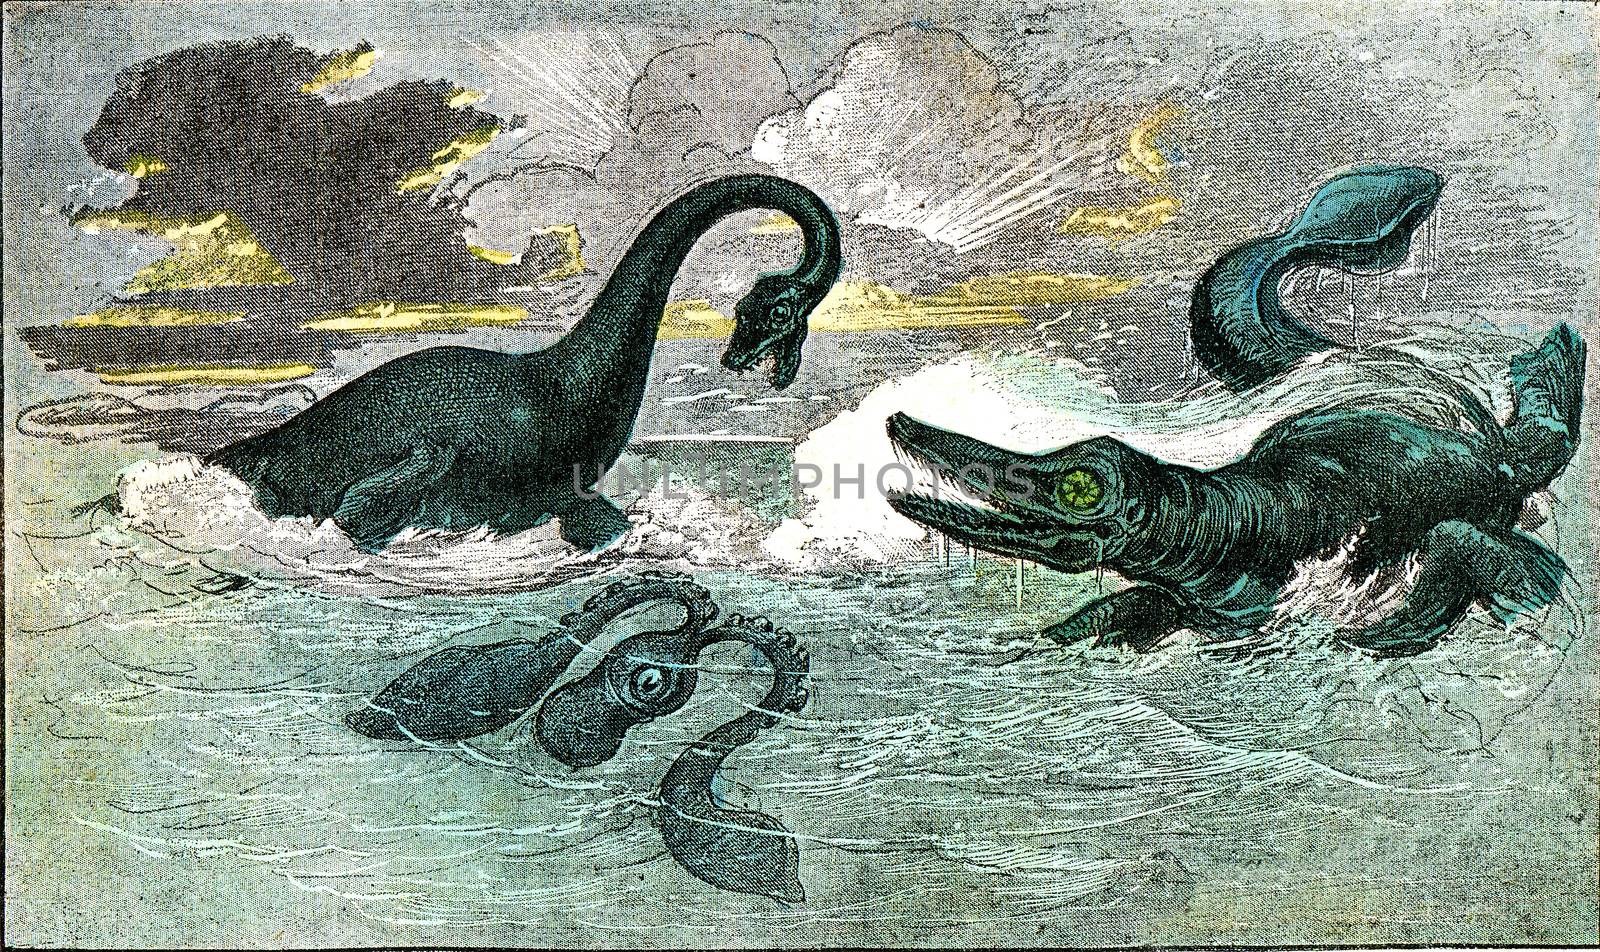 The plesiosaur and ichthyosaur of the period of the Lias, vintage engraved illustration. From Natural Creation and Living Beings.
